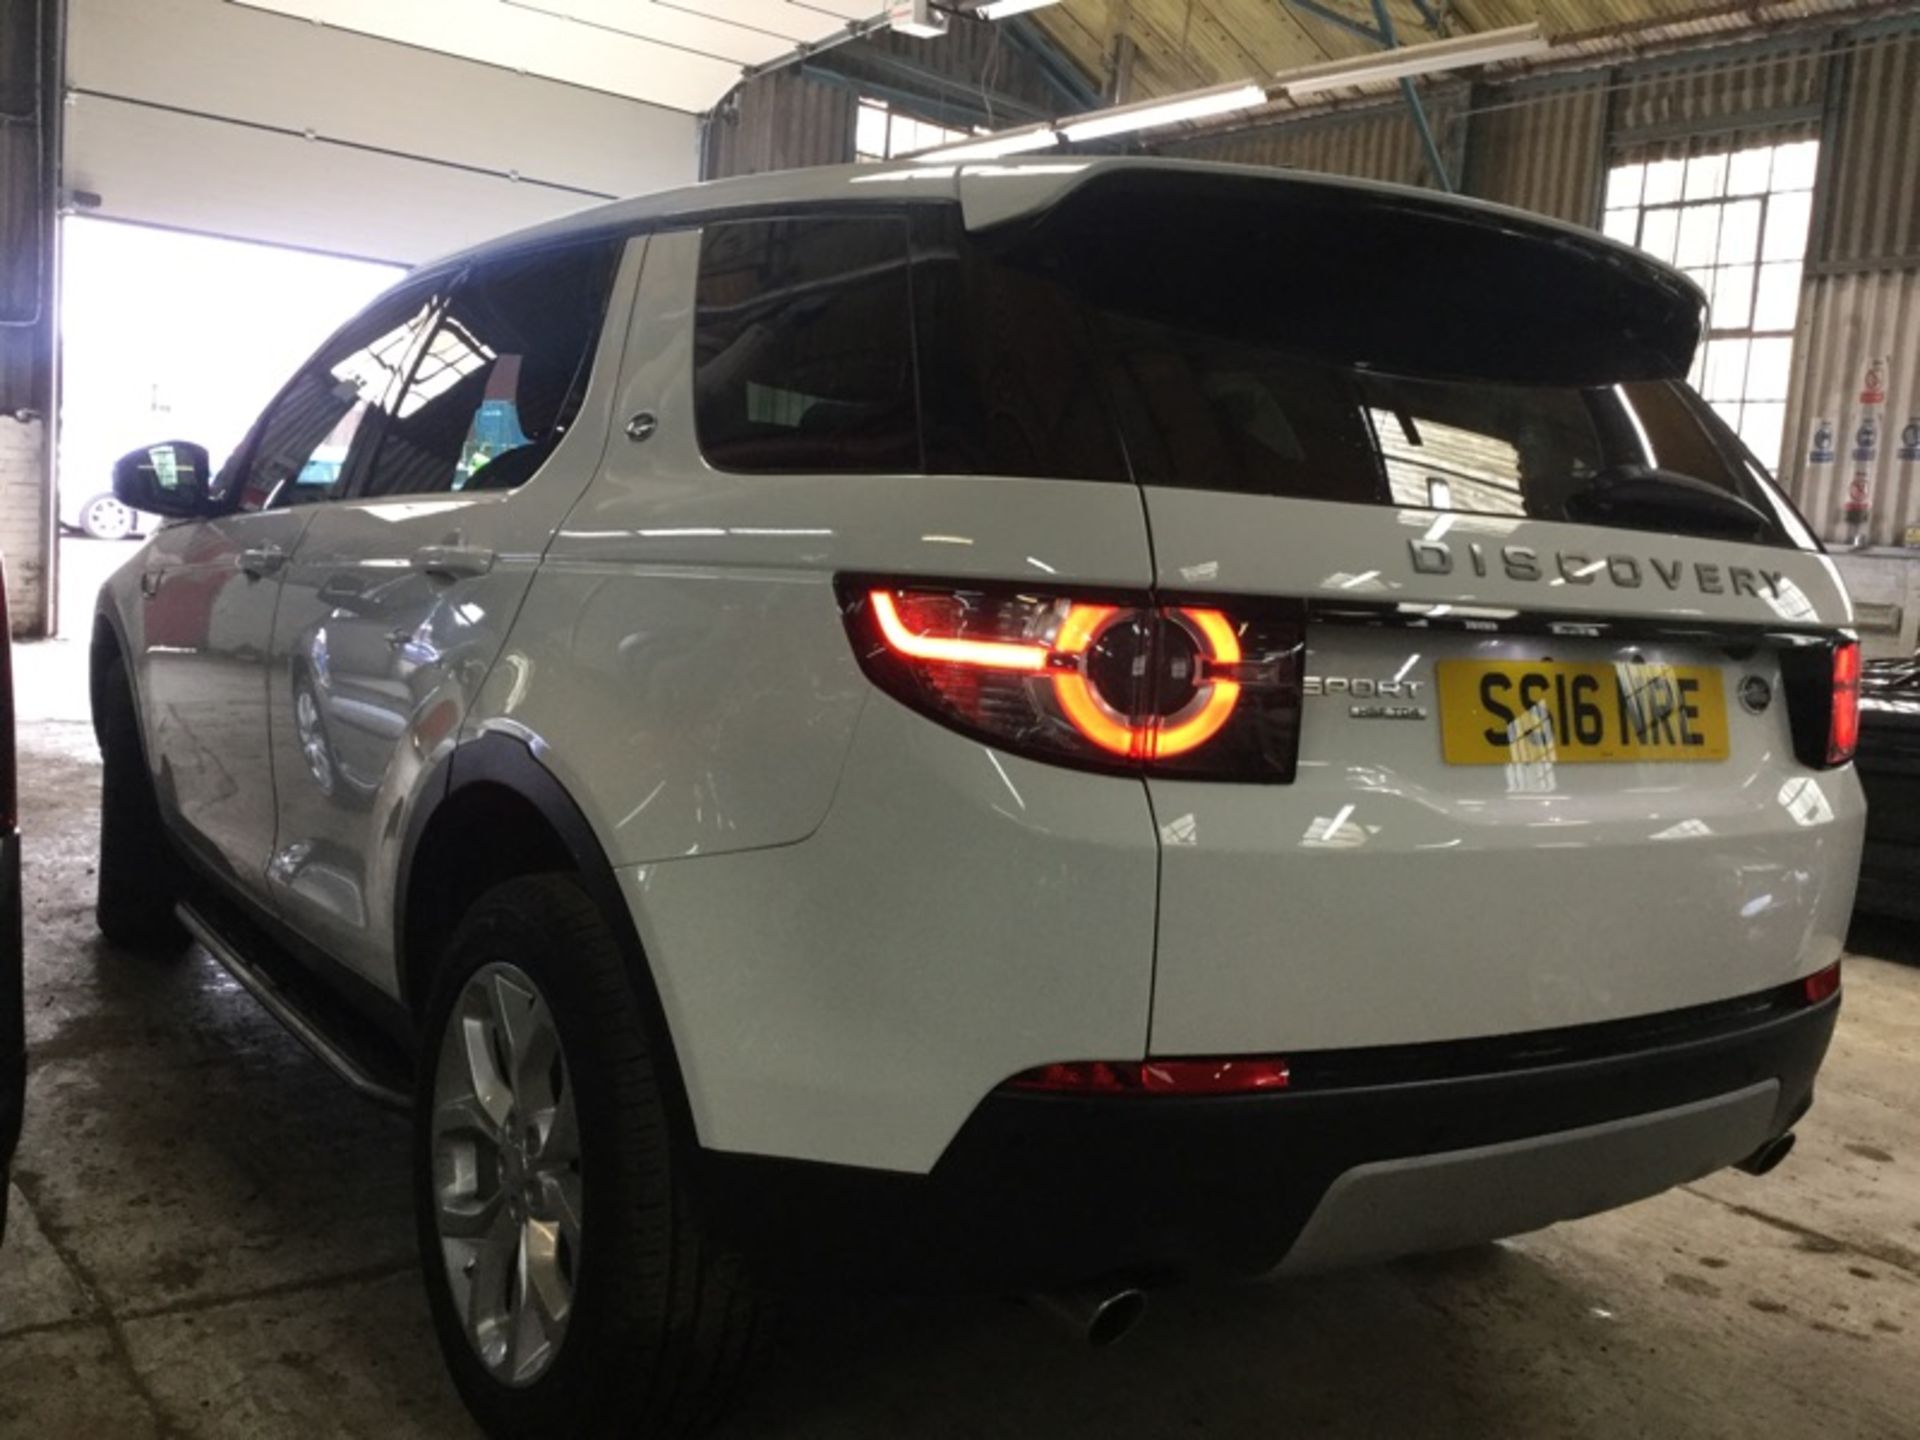 ** ON SALE ** Land Rover Discovery Sport TD4 180 HSE 2.0 2016'16 Reg'-Alloy Wheels-7 seats- - Image 3 of 9